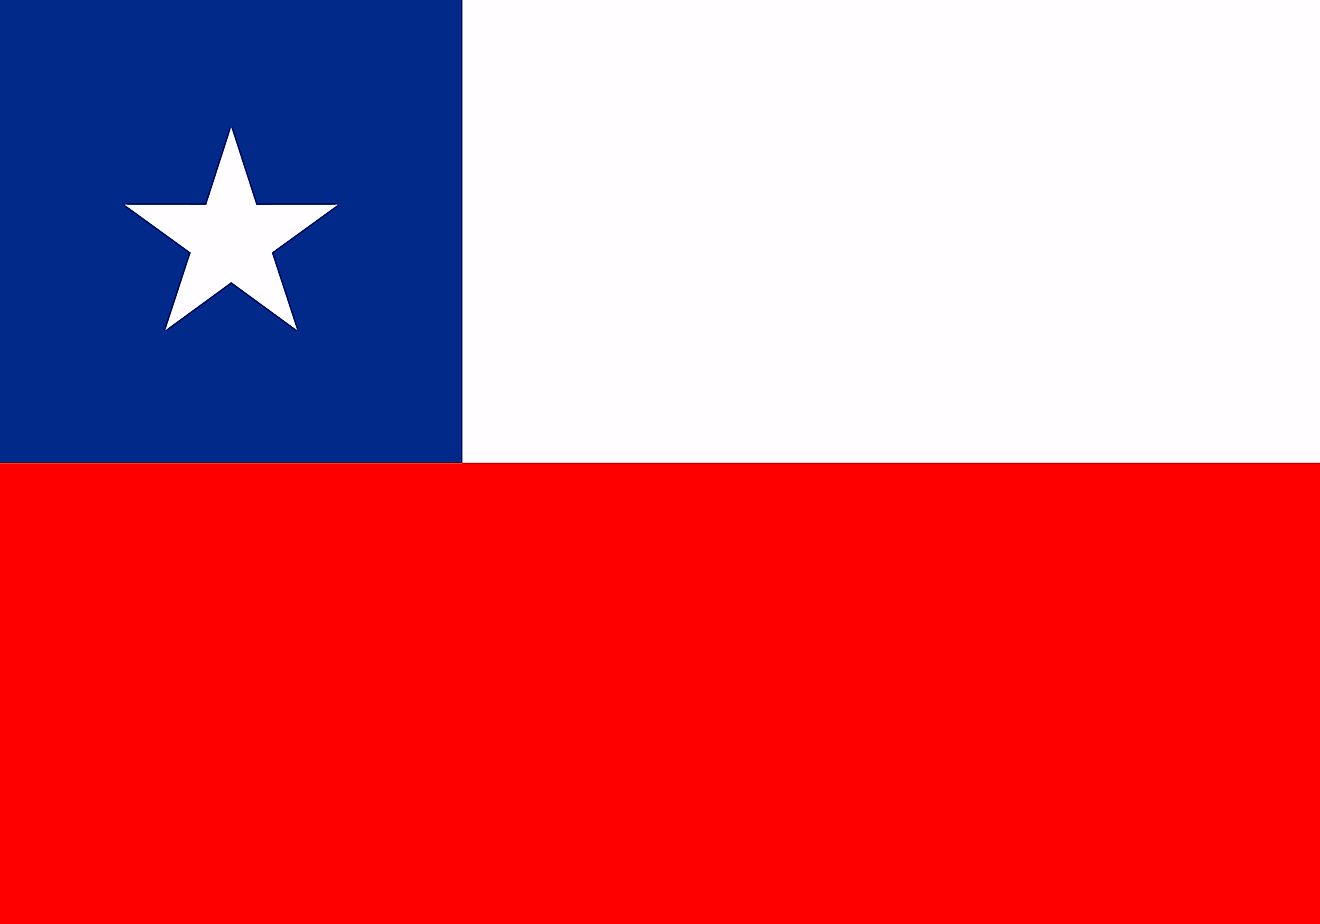 The National Flag of Chile features two equal horizontal bands of white (top) and red; with a blue square band at the hoist end of the white band. 